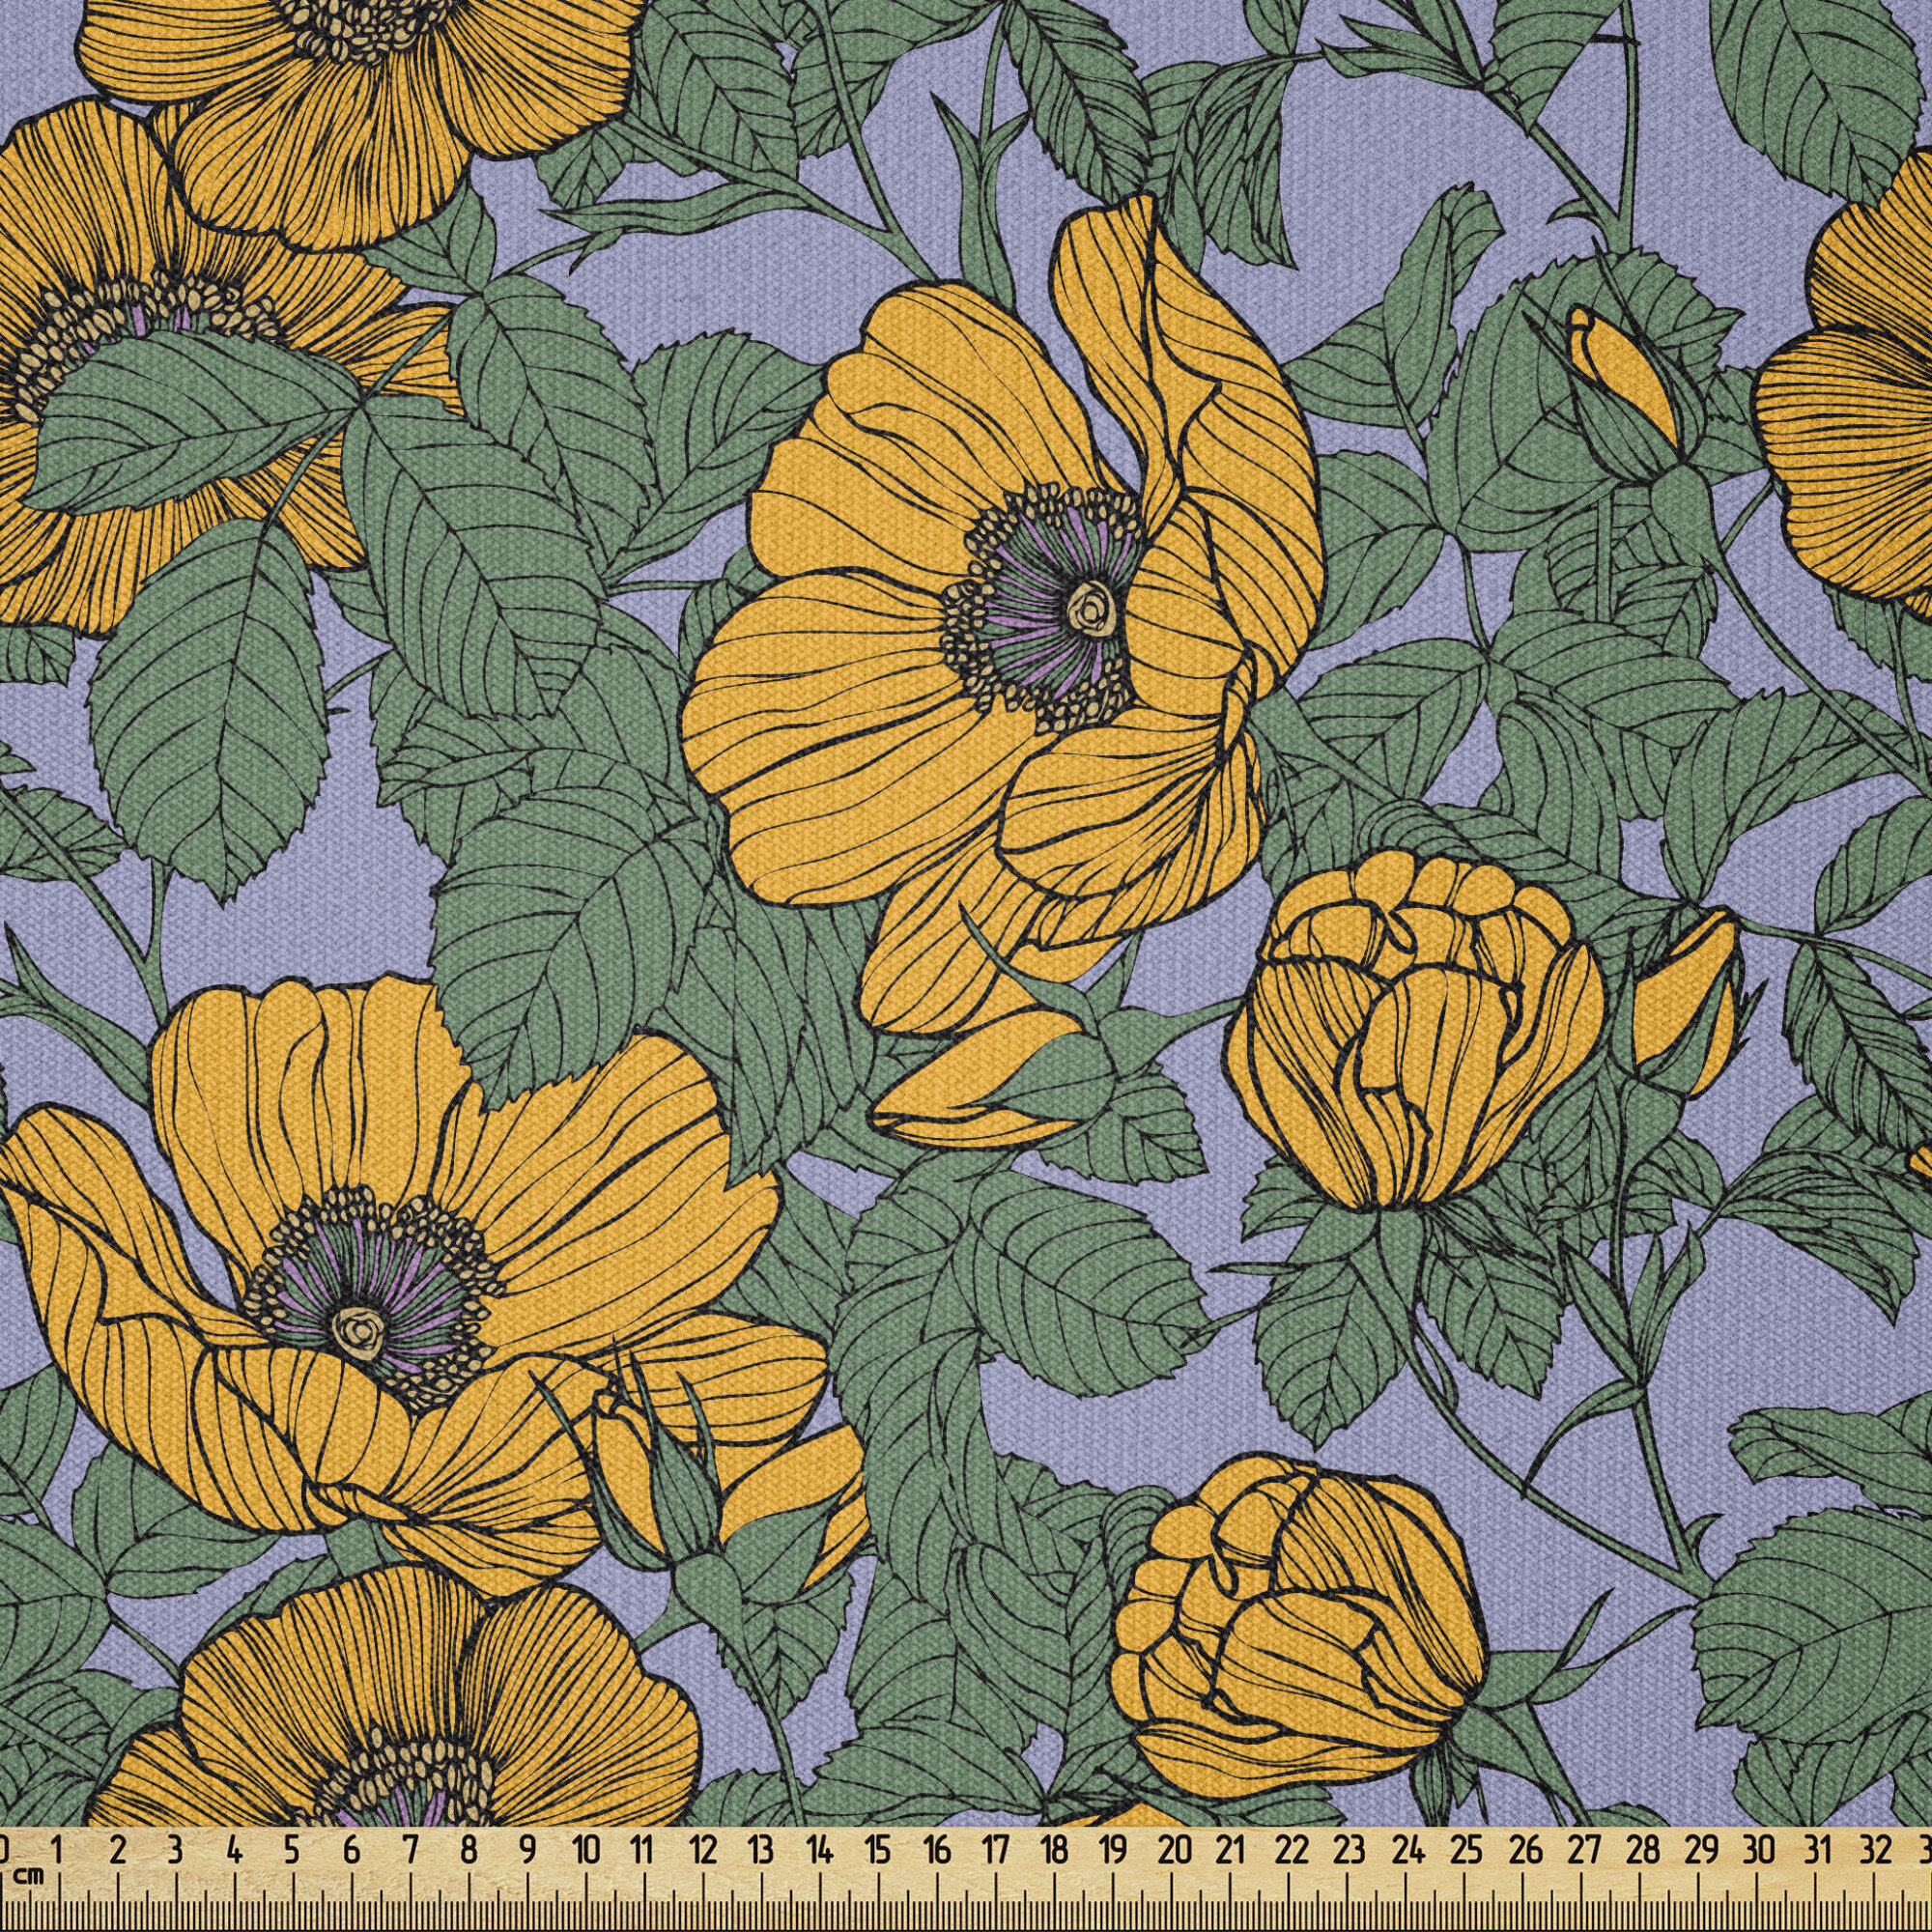 Vintage Fabric By The Yard, Art Nouveau Inspired Tender Entangled Leaves  And Flowers,Square